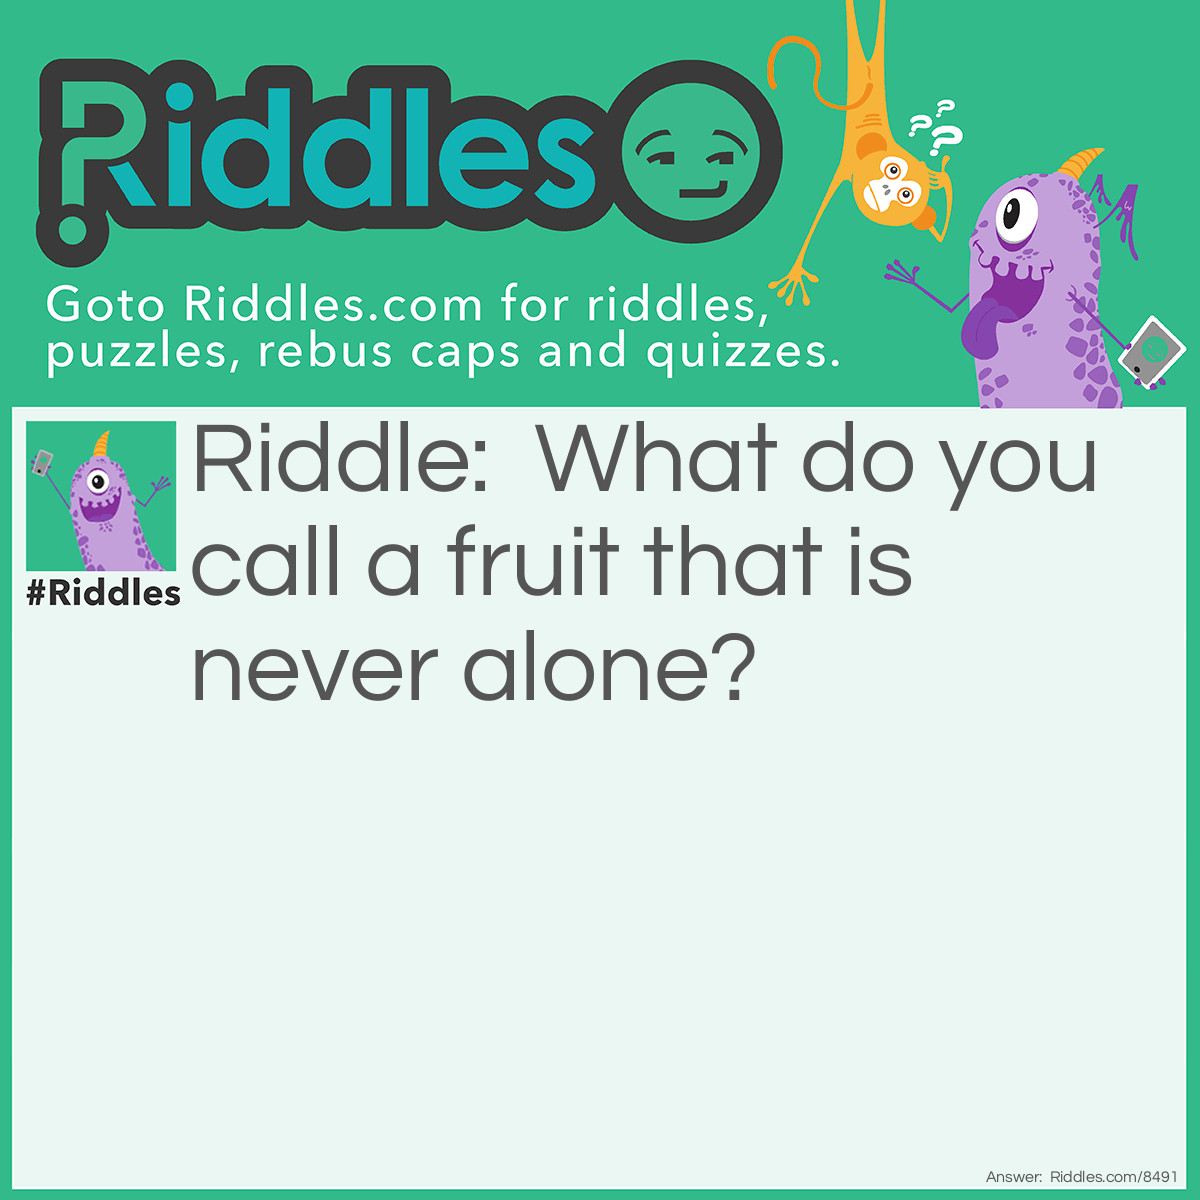 Riddle: What do you call a fruit that is never alone? Answer: A pear.